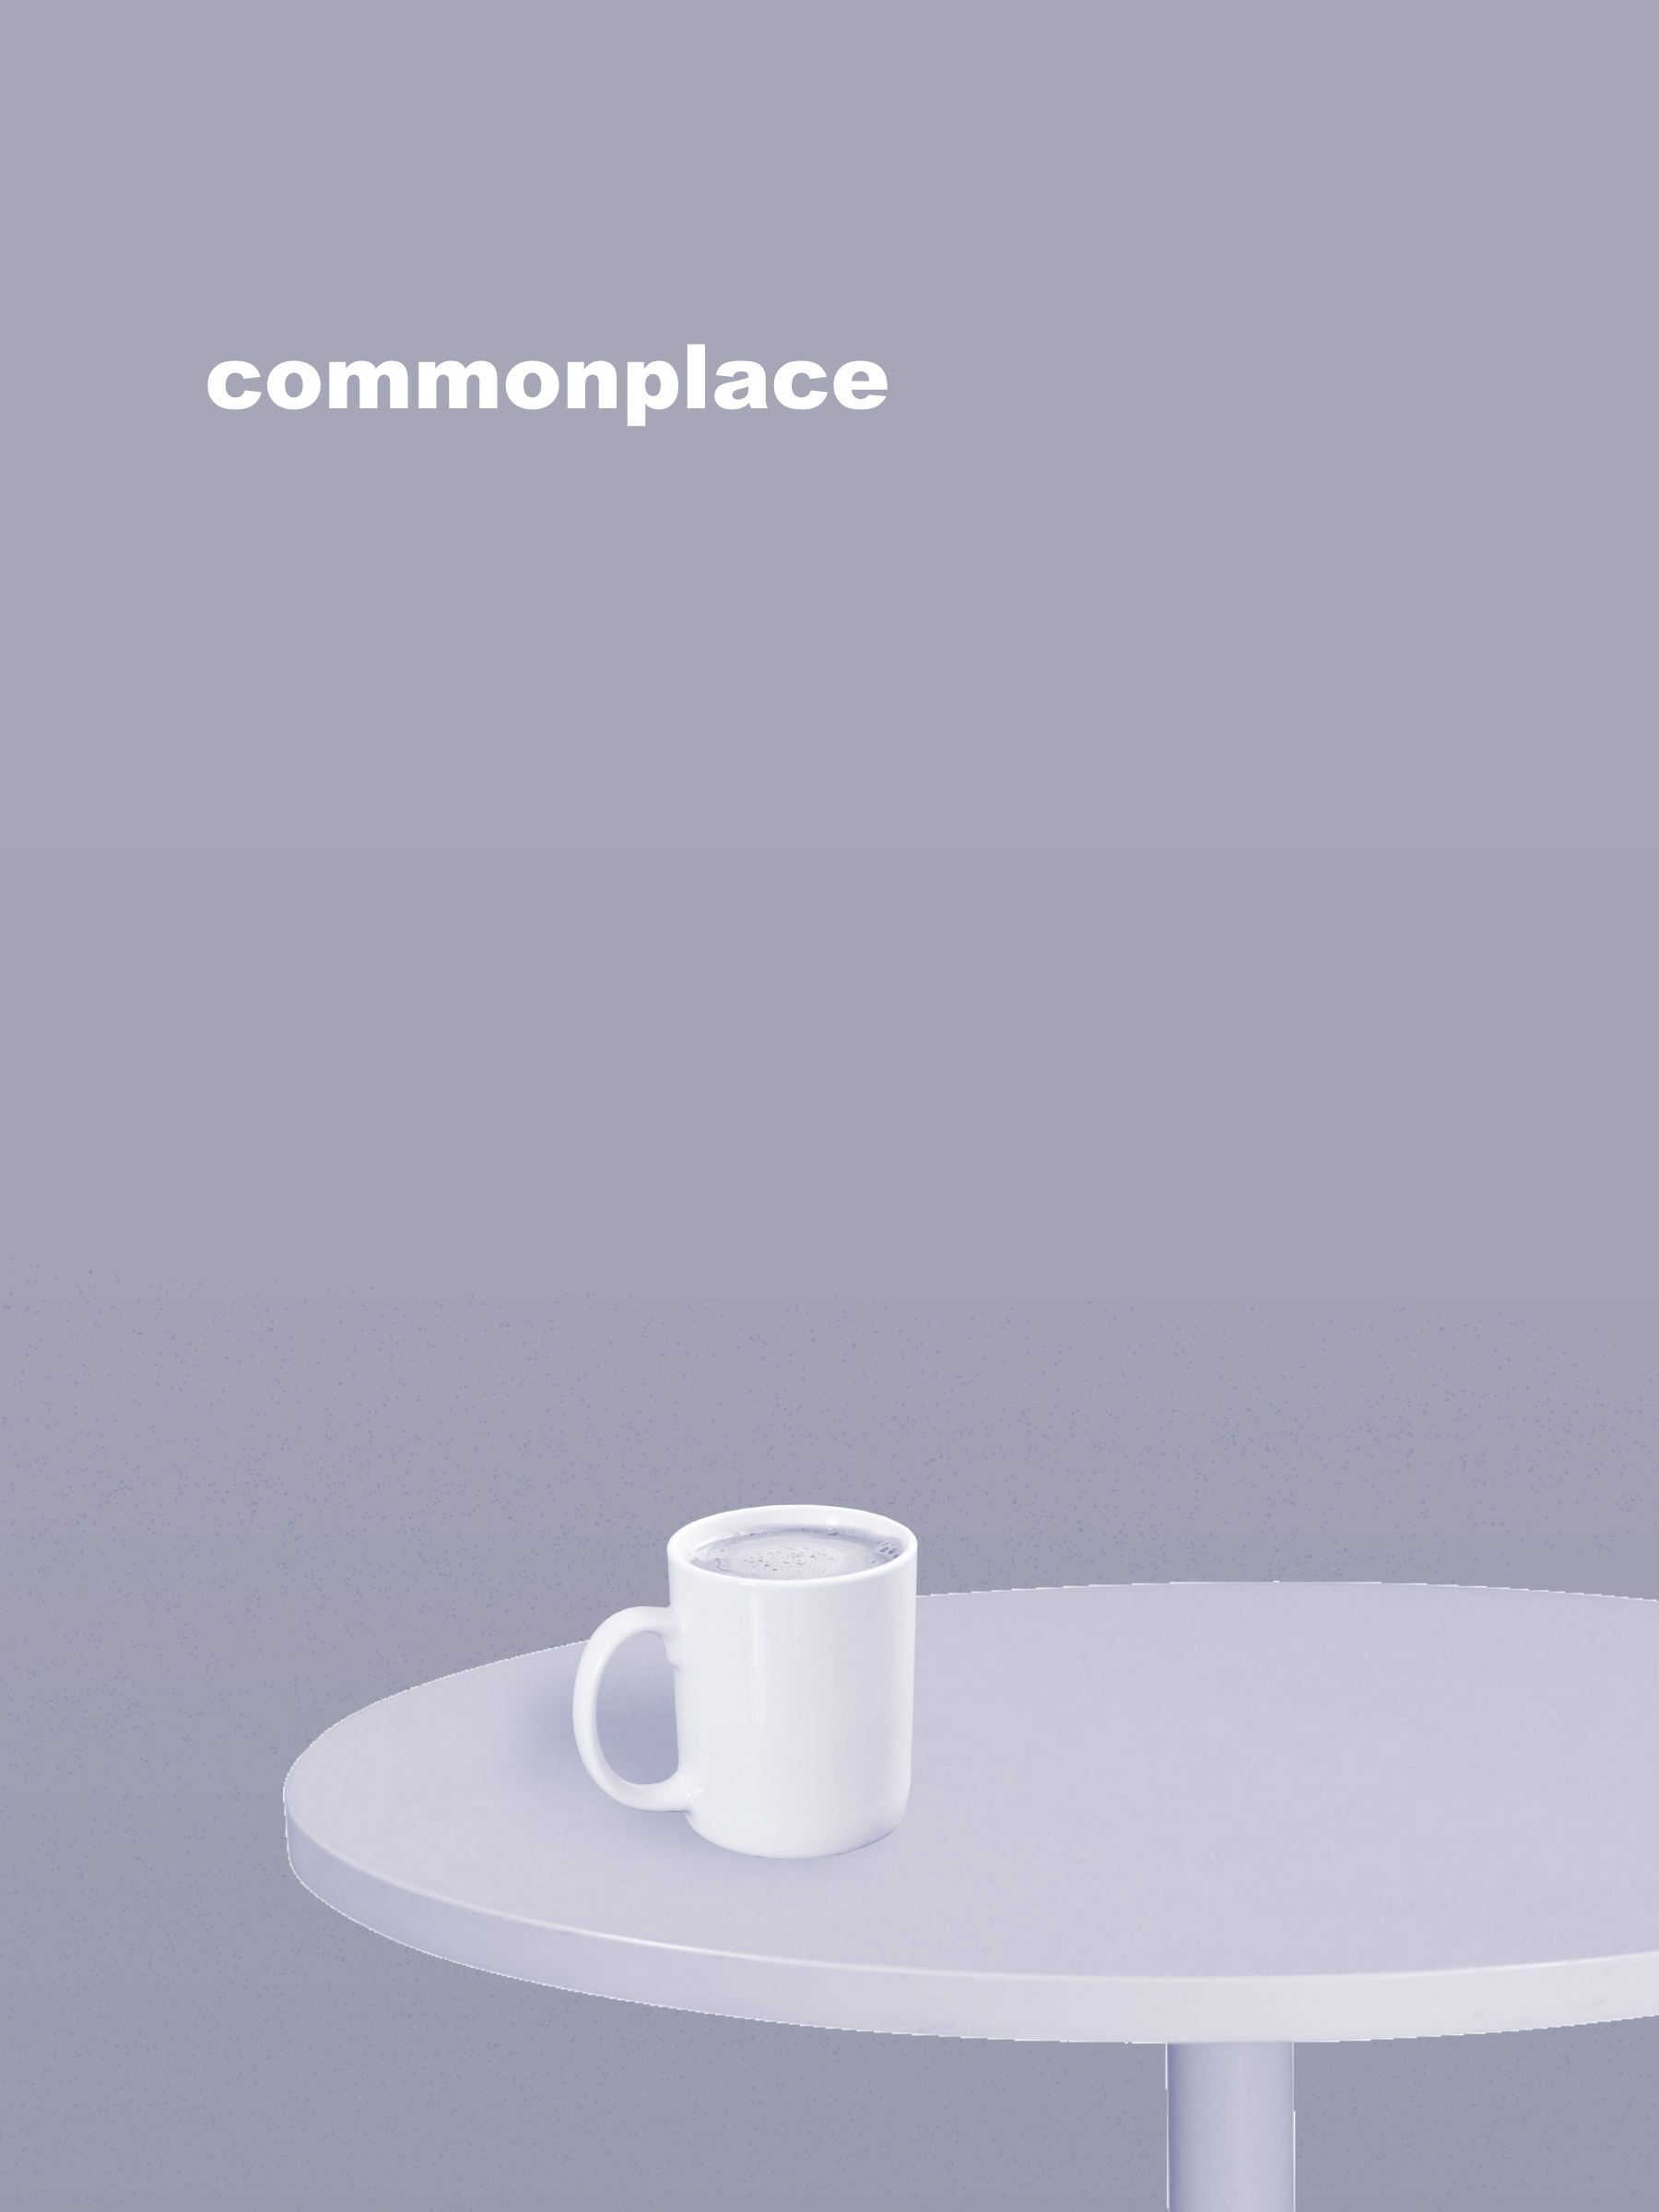 Initial concept of album art for the official Commonplace soundtrack. A coffee cup rests at the edge of a round table; all colors are low-contrast and desaturated.